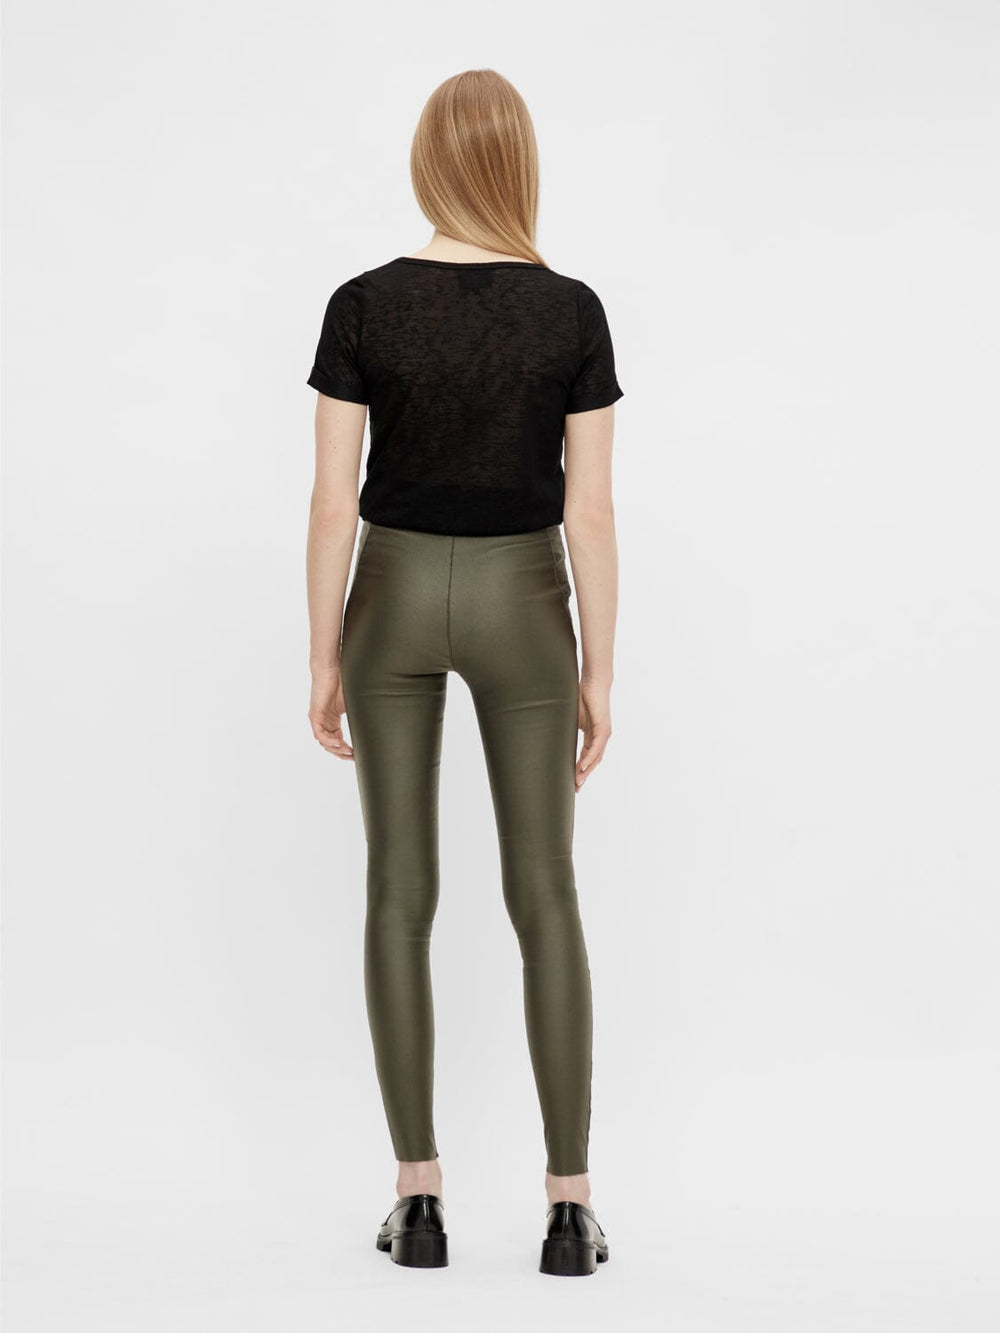 Object Collectors Item, Objbelle Mw Coated Leggings, Forest Night